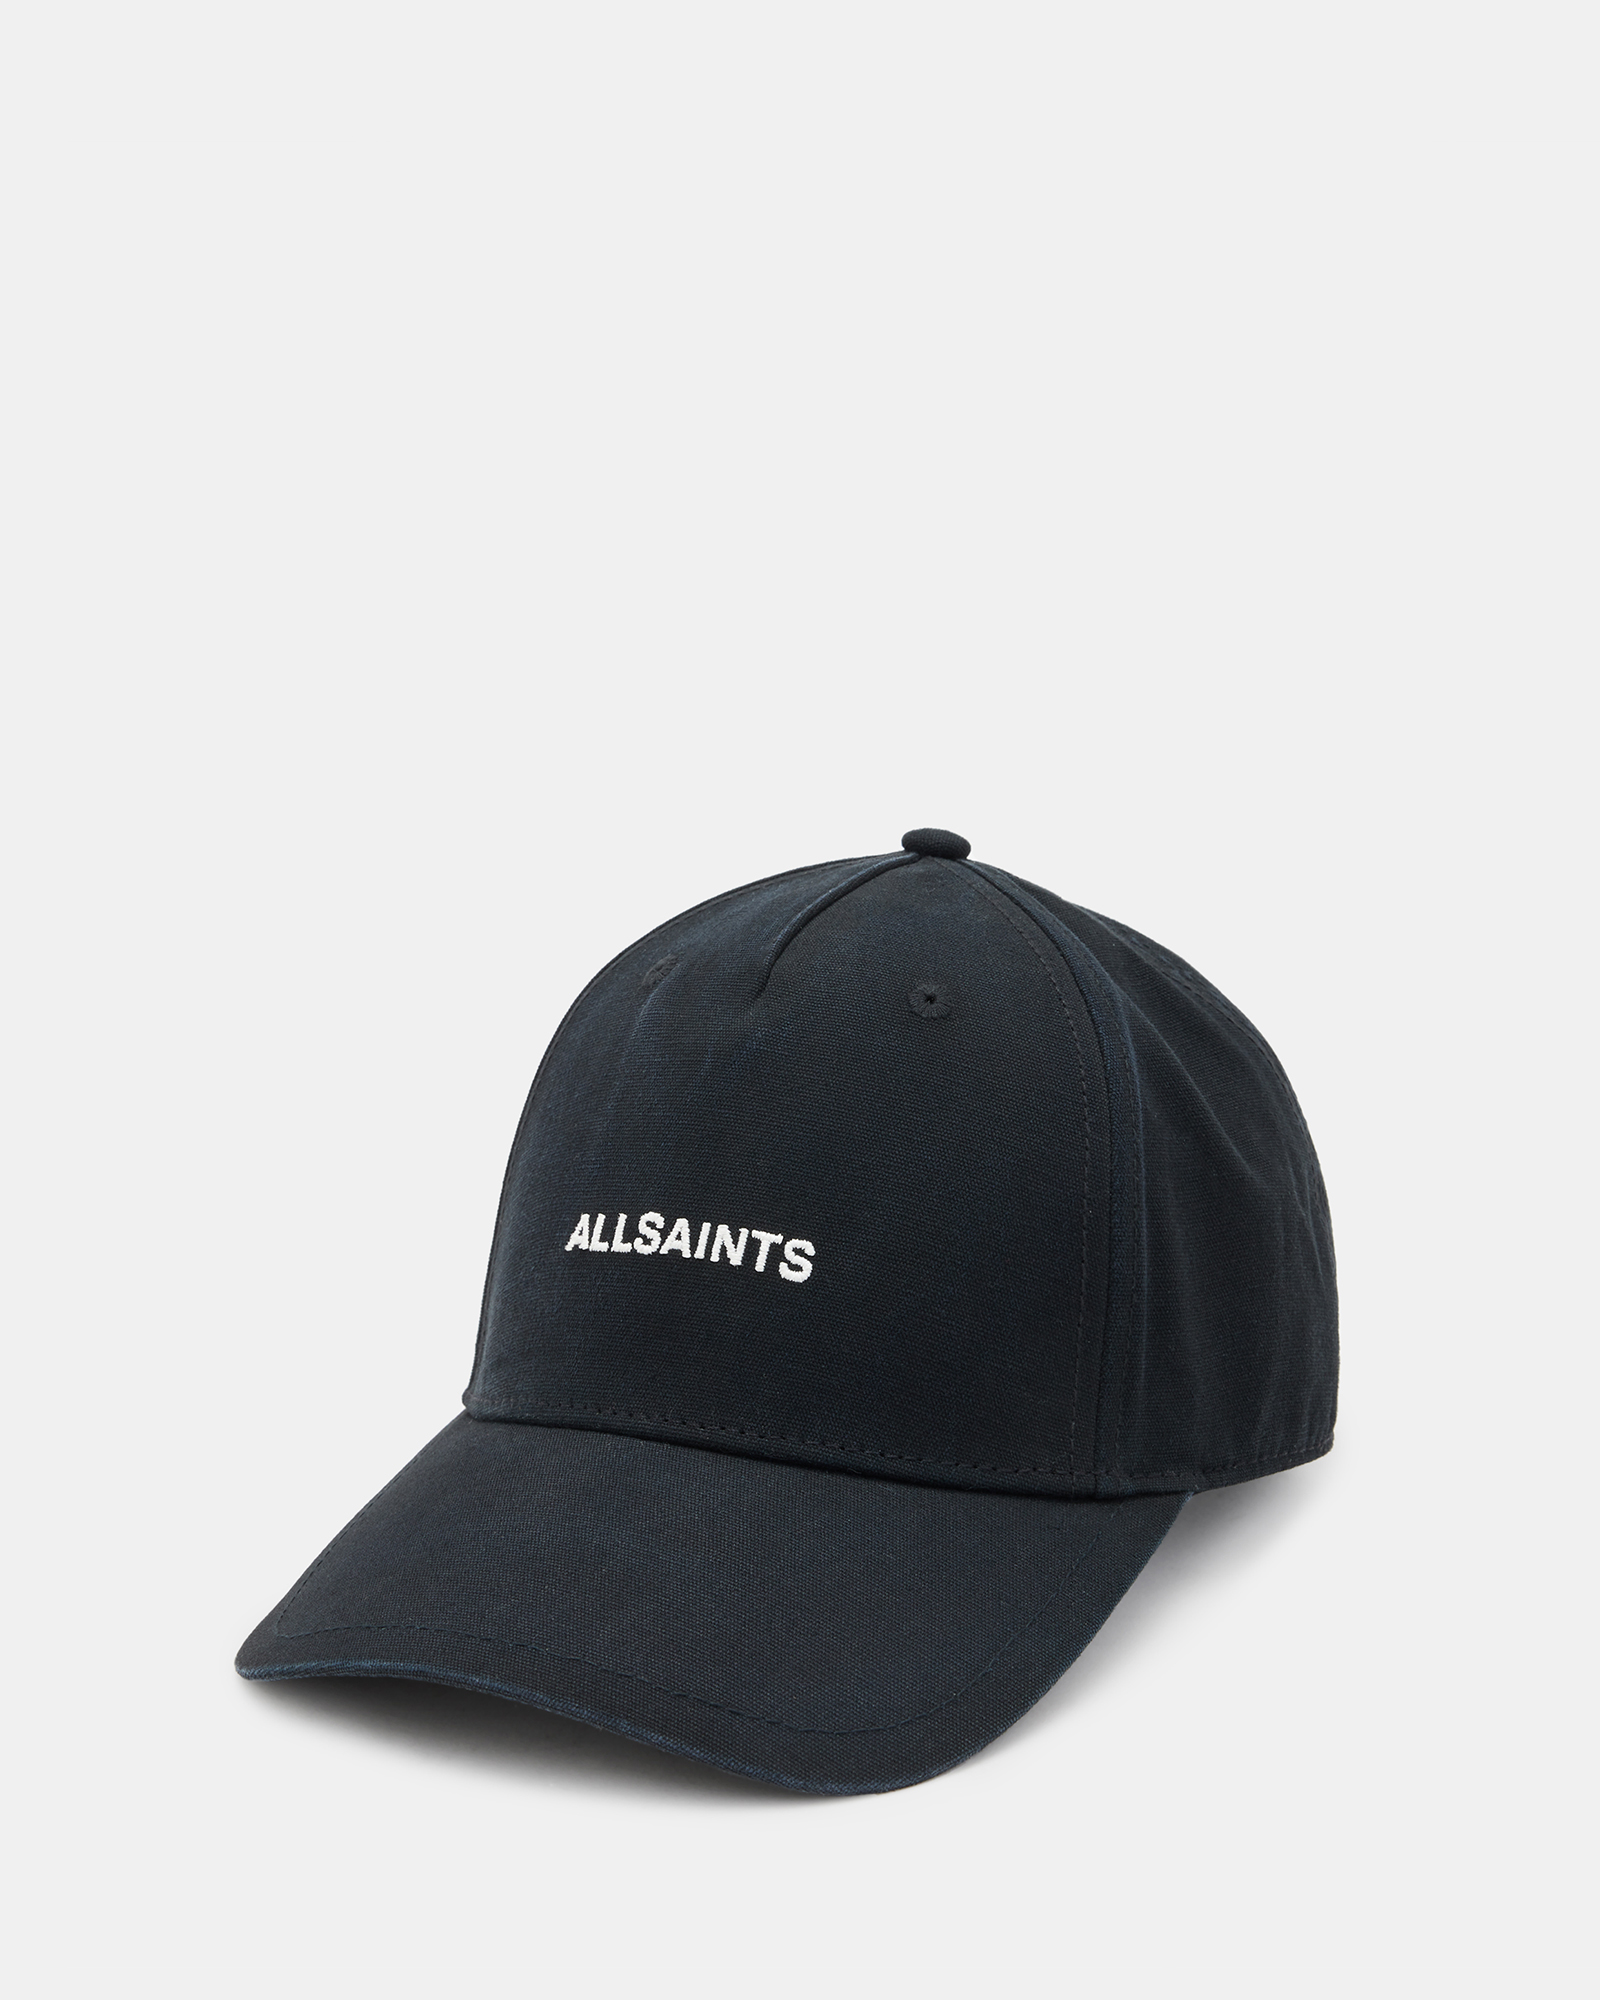 AllSaints Tierra Embroidered Logo Baseball Cap,, WASHED BLACK/WHITE